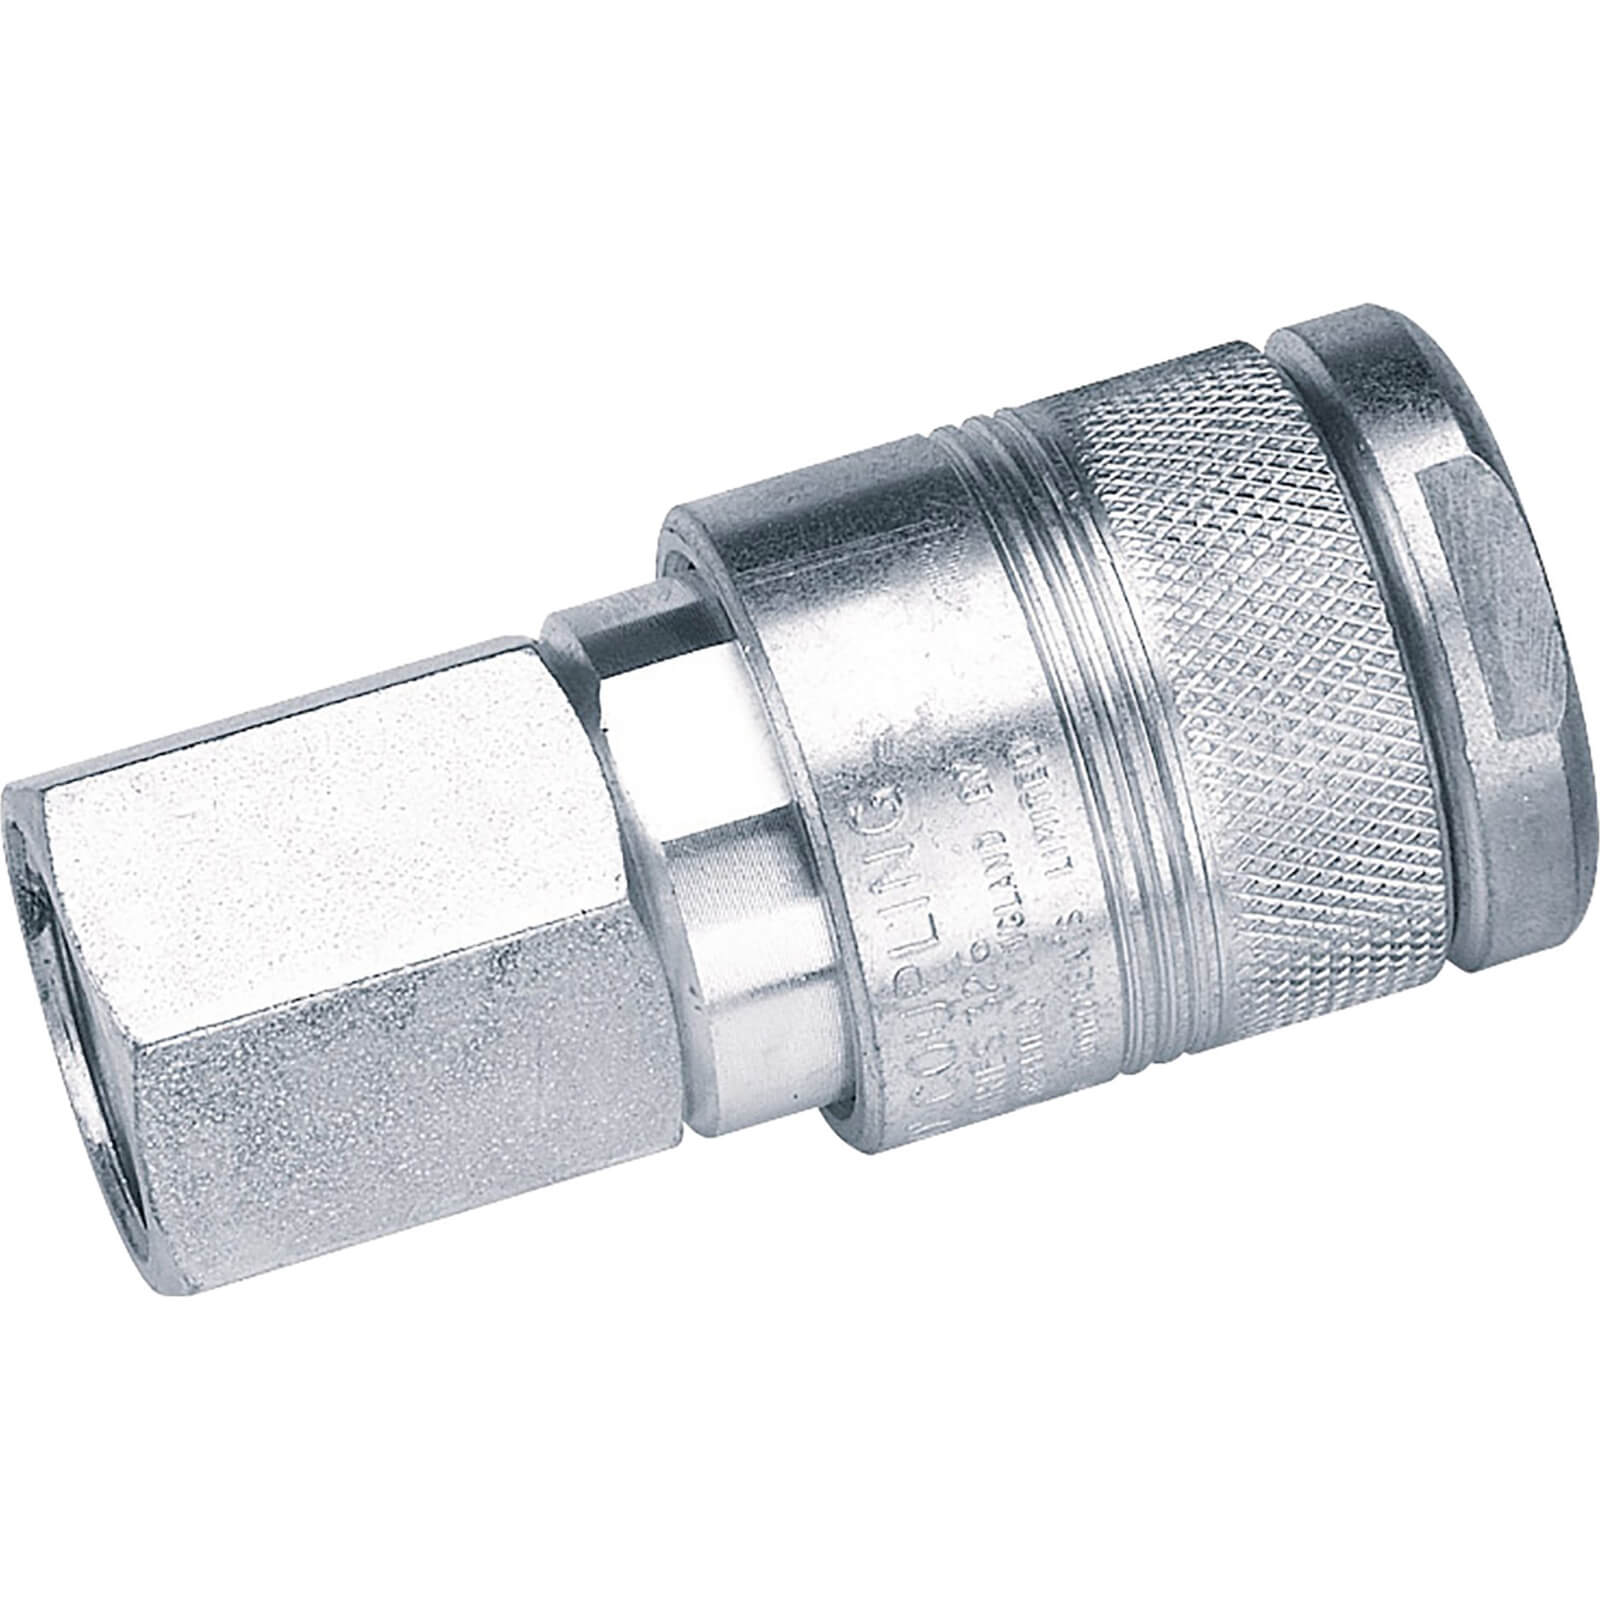 Image of Draper PCL M100 Air Line Coupling Female Thread 1/2" BSP Pack of 1